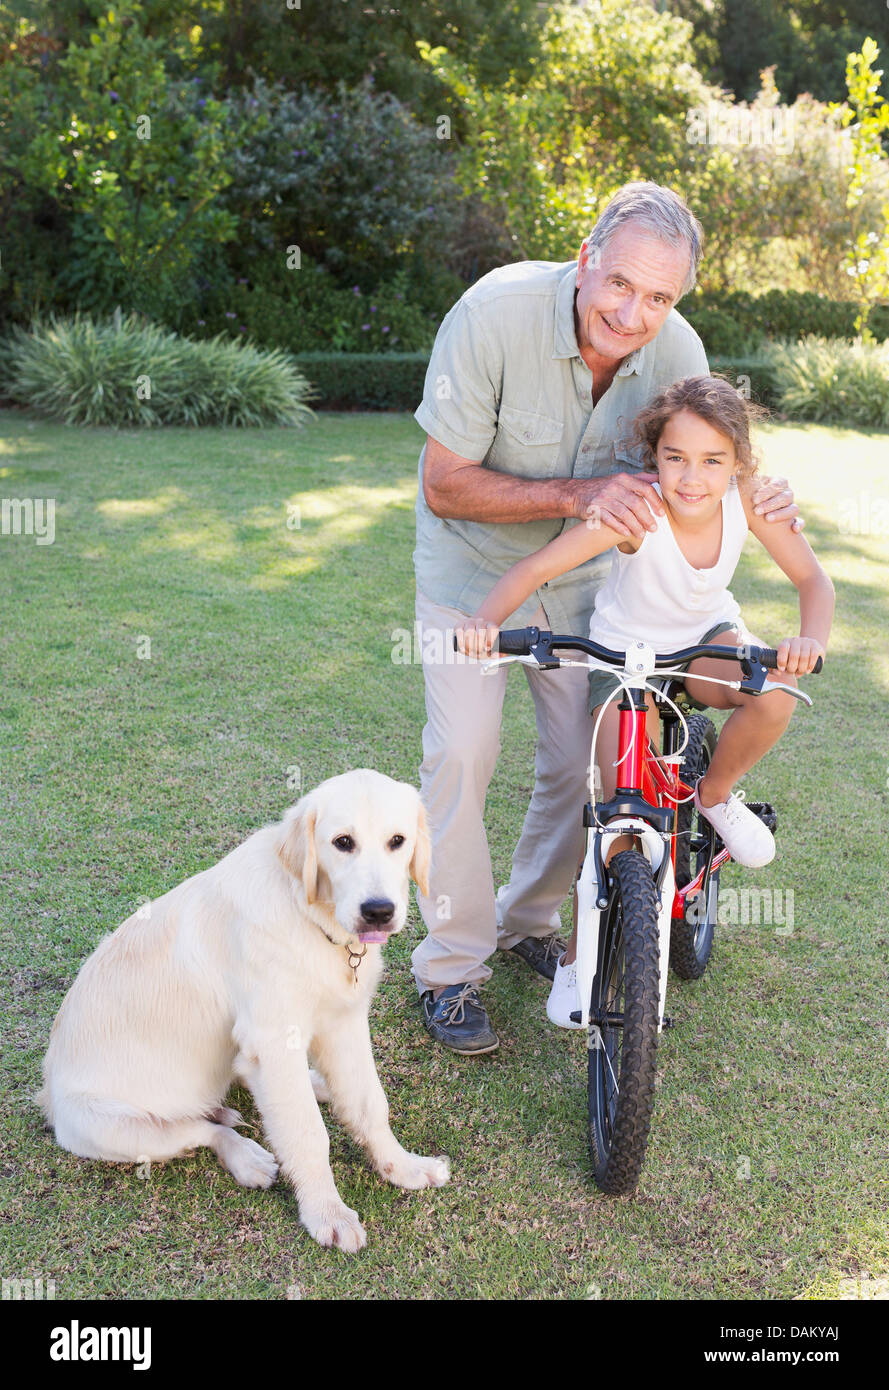 Older man with granddaughter and dog Stock Photo